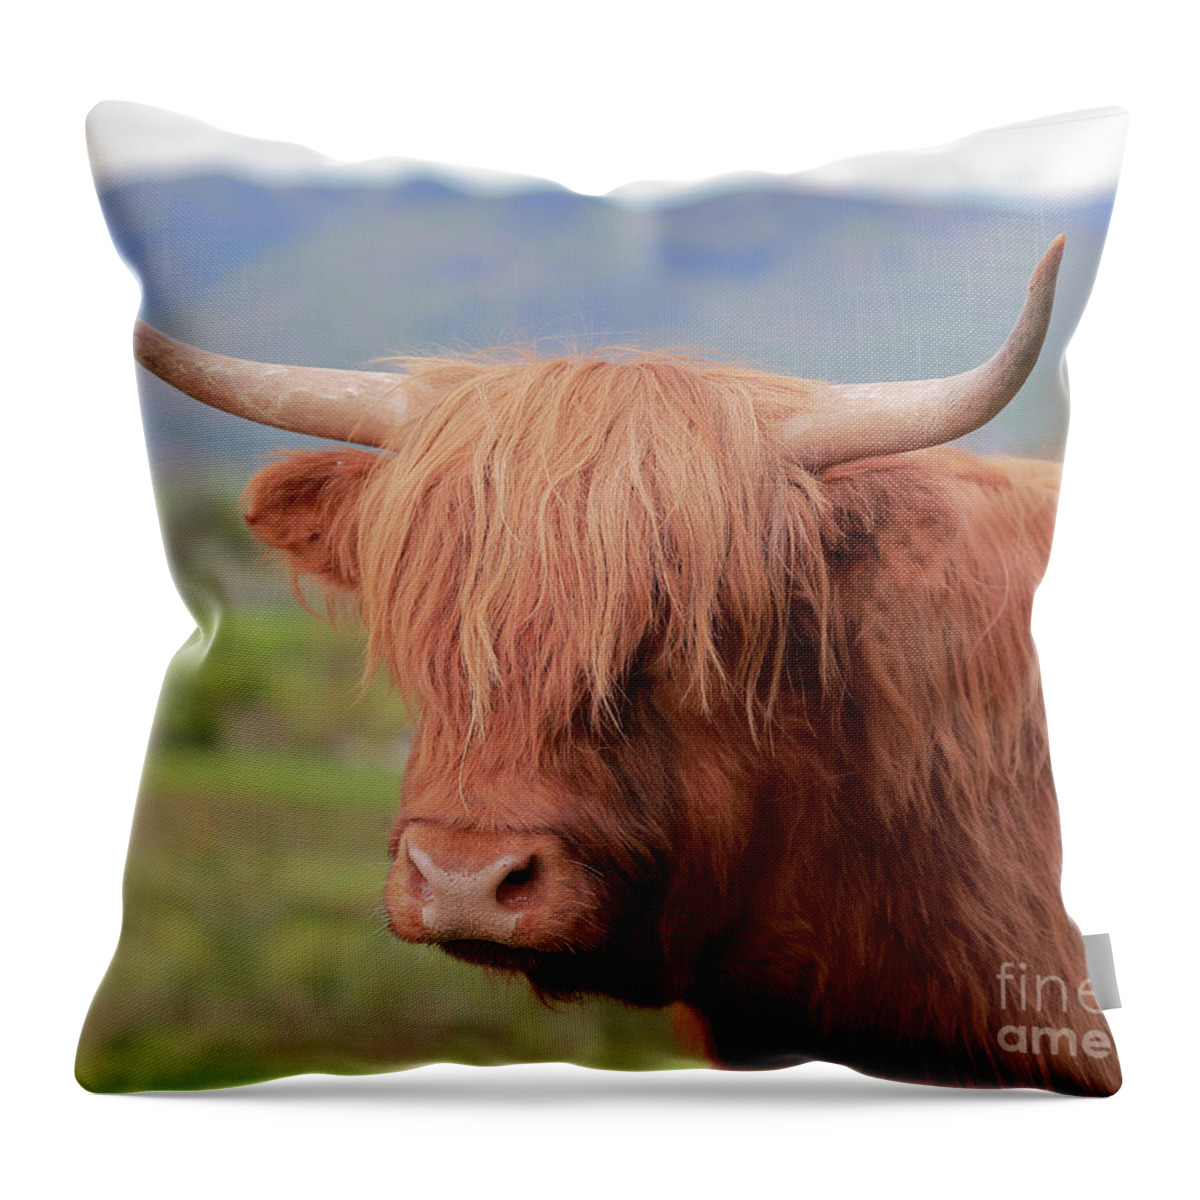 Highland Cow Throw Pillow featuring the photograph Highland Cow Portrait by Maria Gaellman